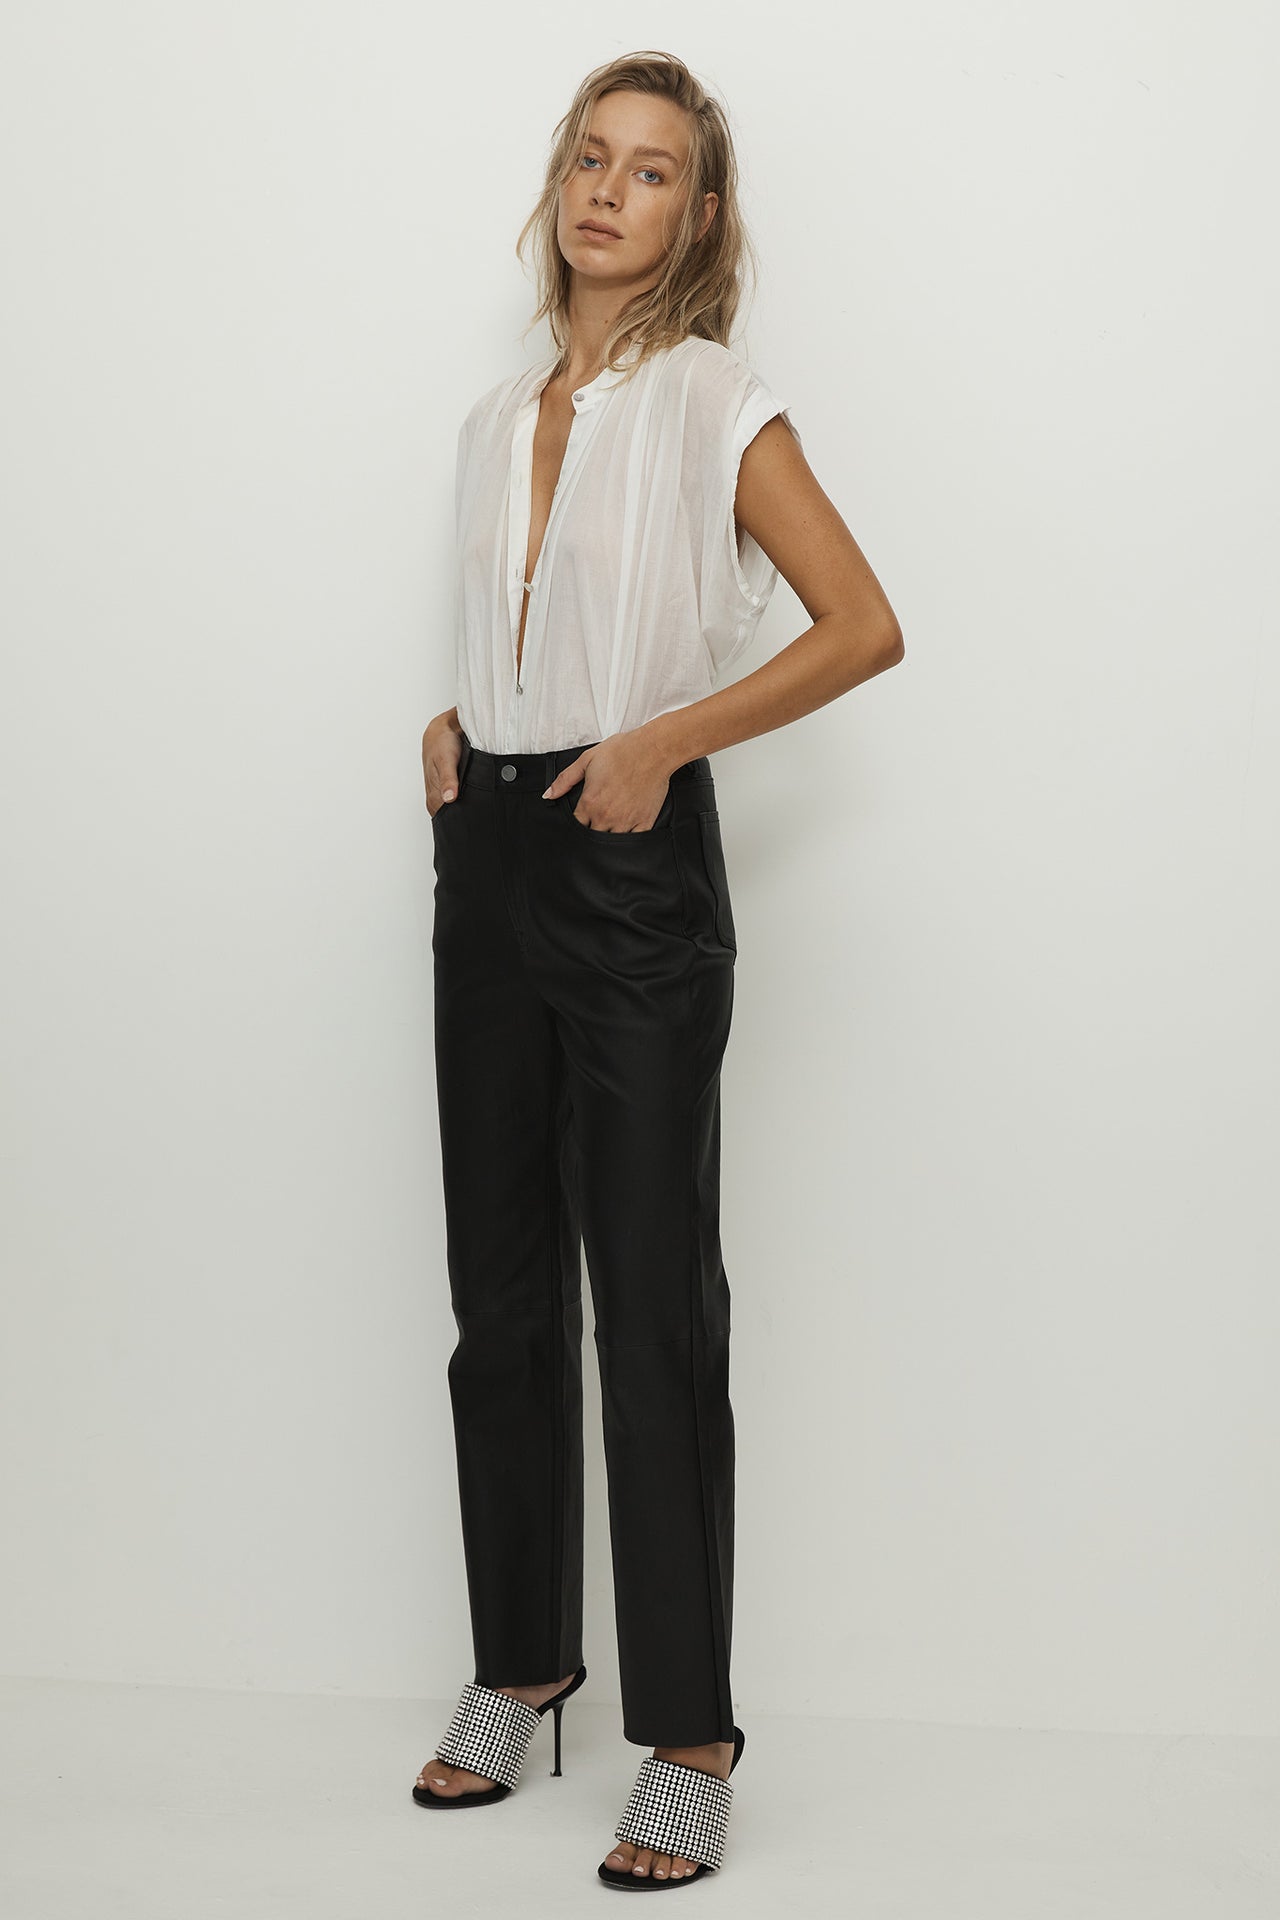 Gold Mist Stretch Leather Pant with Skinny Leg – West Coast Leather